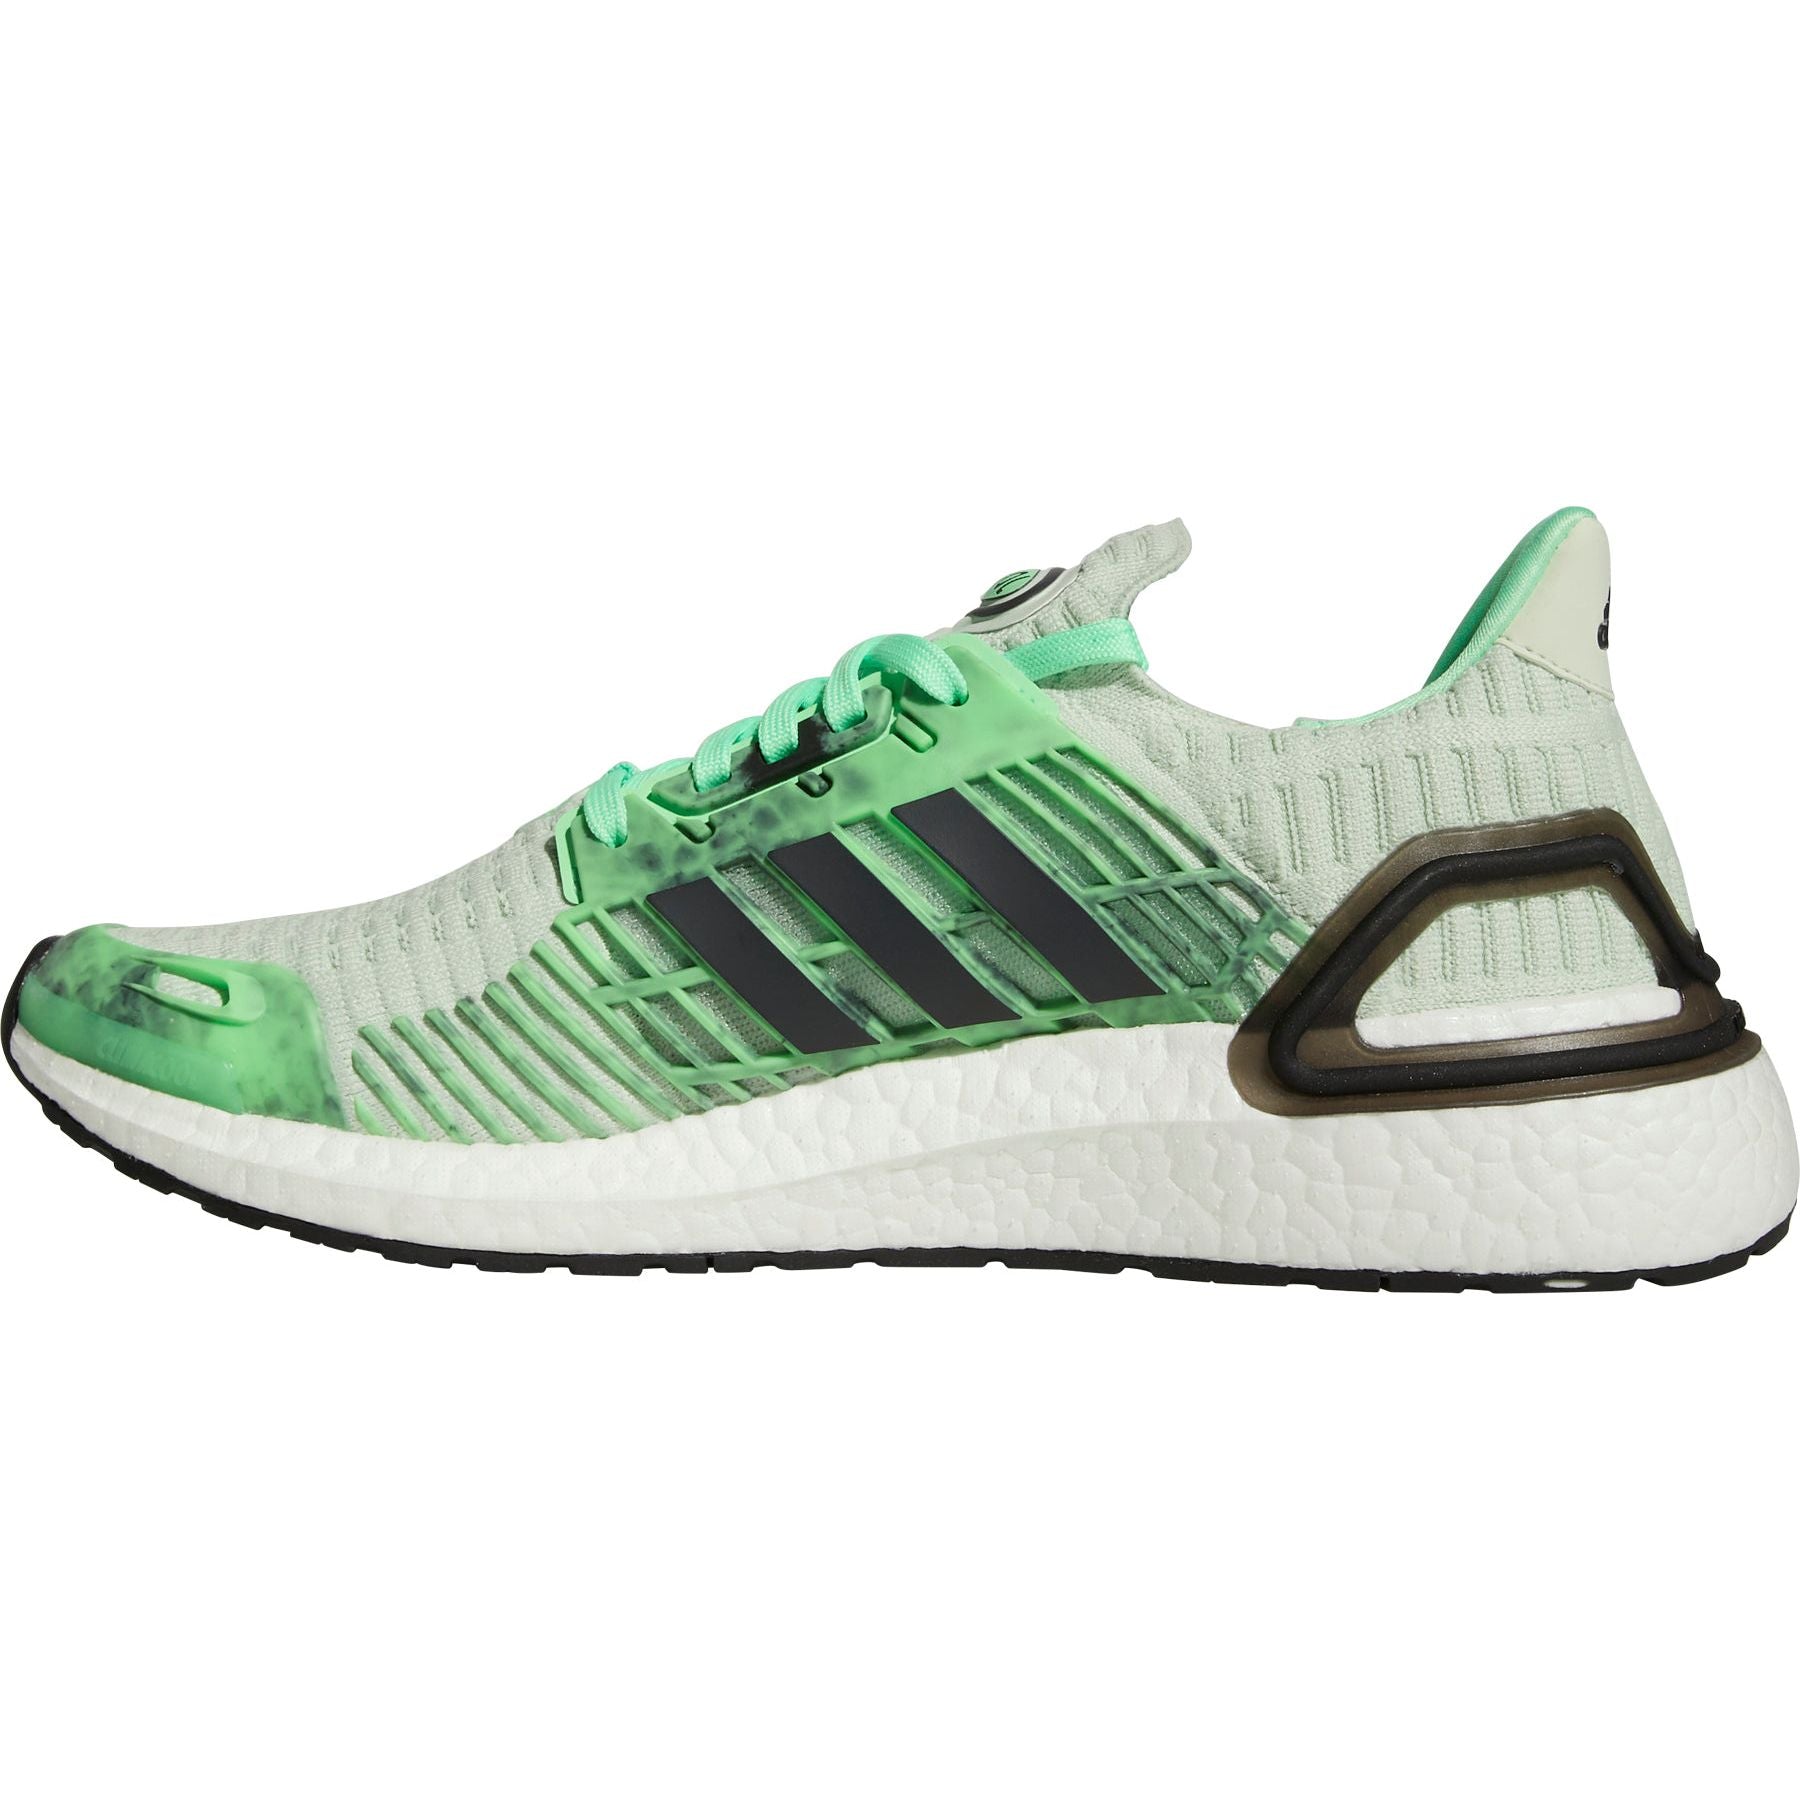 Adidas Ultra Boost Dna Climacool Gv8760 Inside - Side View